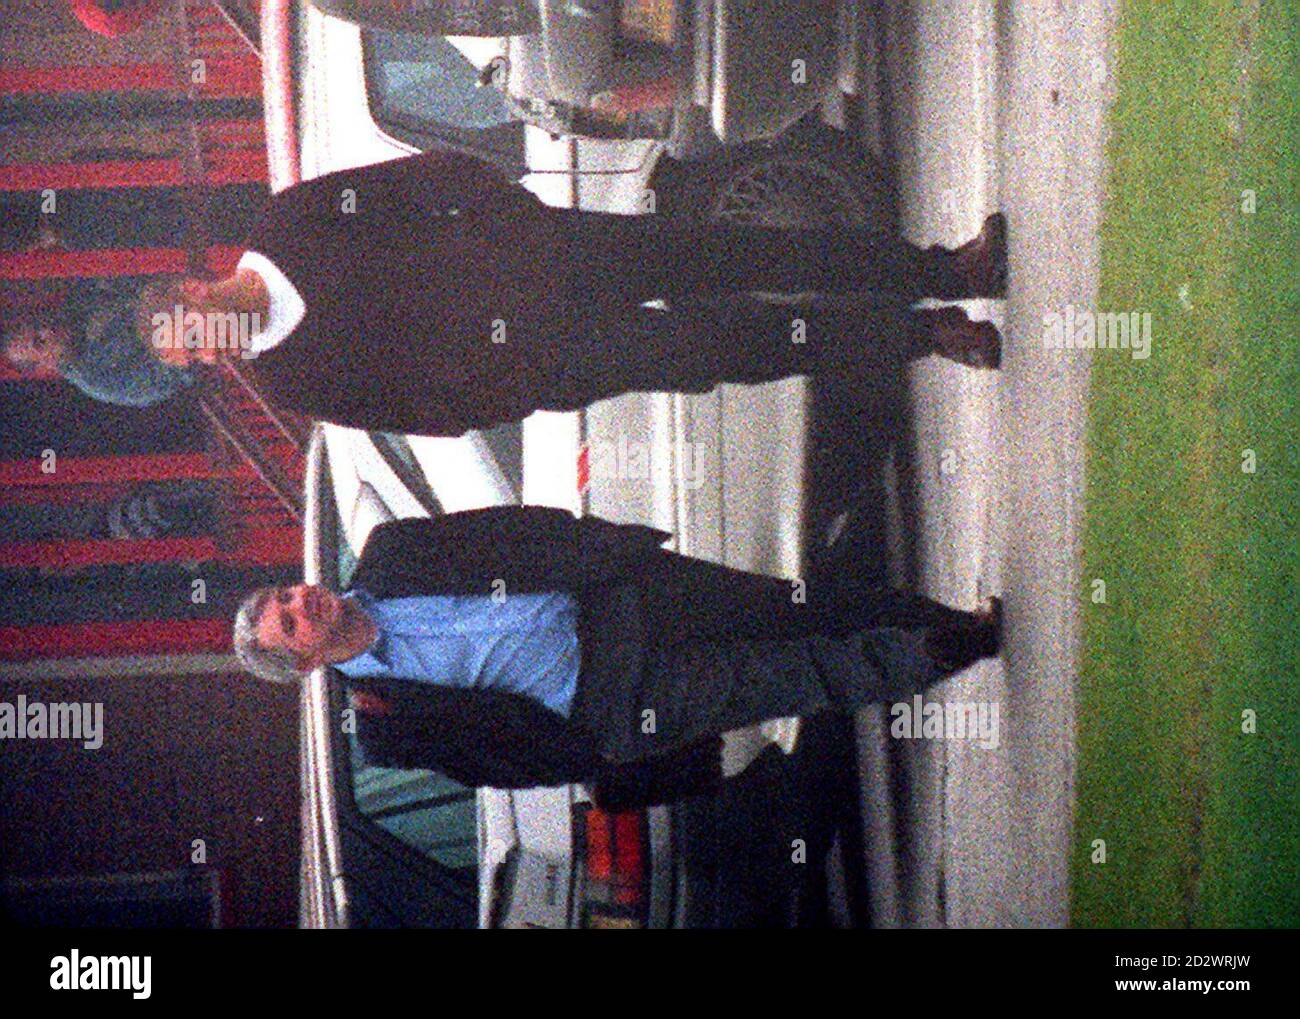 Liverpool striker Stan Collymore (R) is pictured with his agent Paul Stretford leaving the Melwood training after meeting with Reds' boss Roy Evans. Collymore, who set a British transfer record when he moved to Liverpool from Nottingham Forest for 8.5 million during the summer, said in an interview with a magazine over the weekend that he would rather quit football than spend the next two years frustrated in Liverpool's reserves. Stock Photo